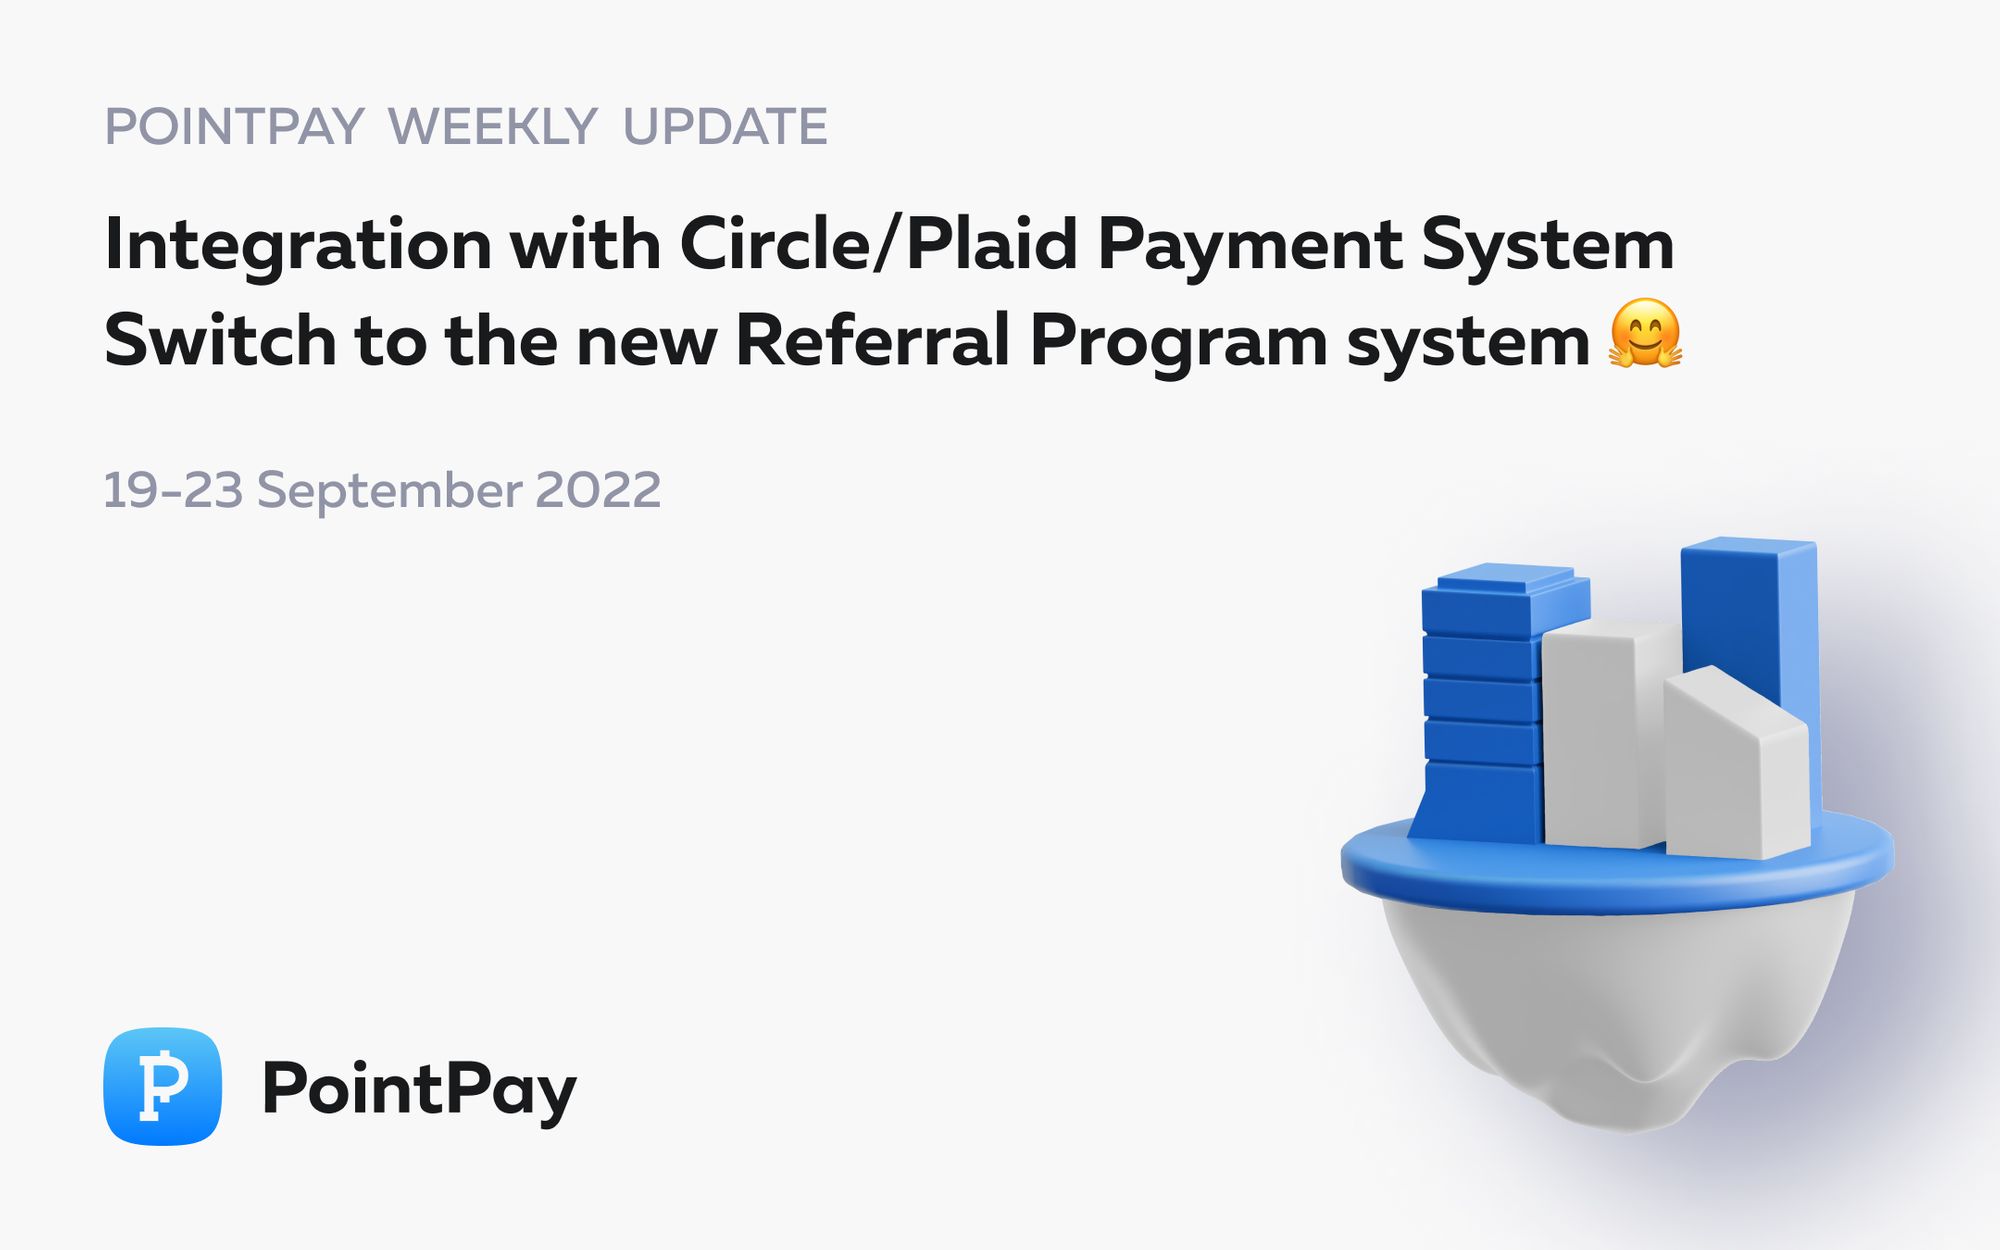 PointPay Weekly Update (19 - 23 September 2022)